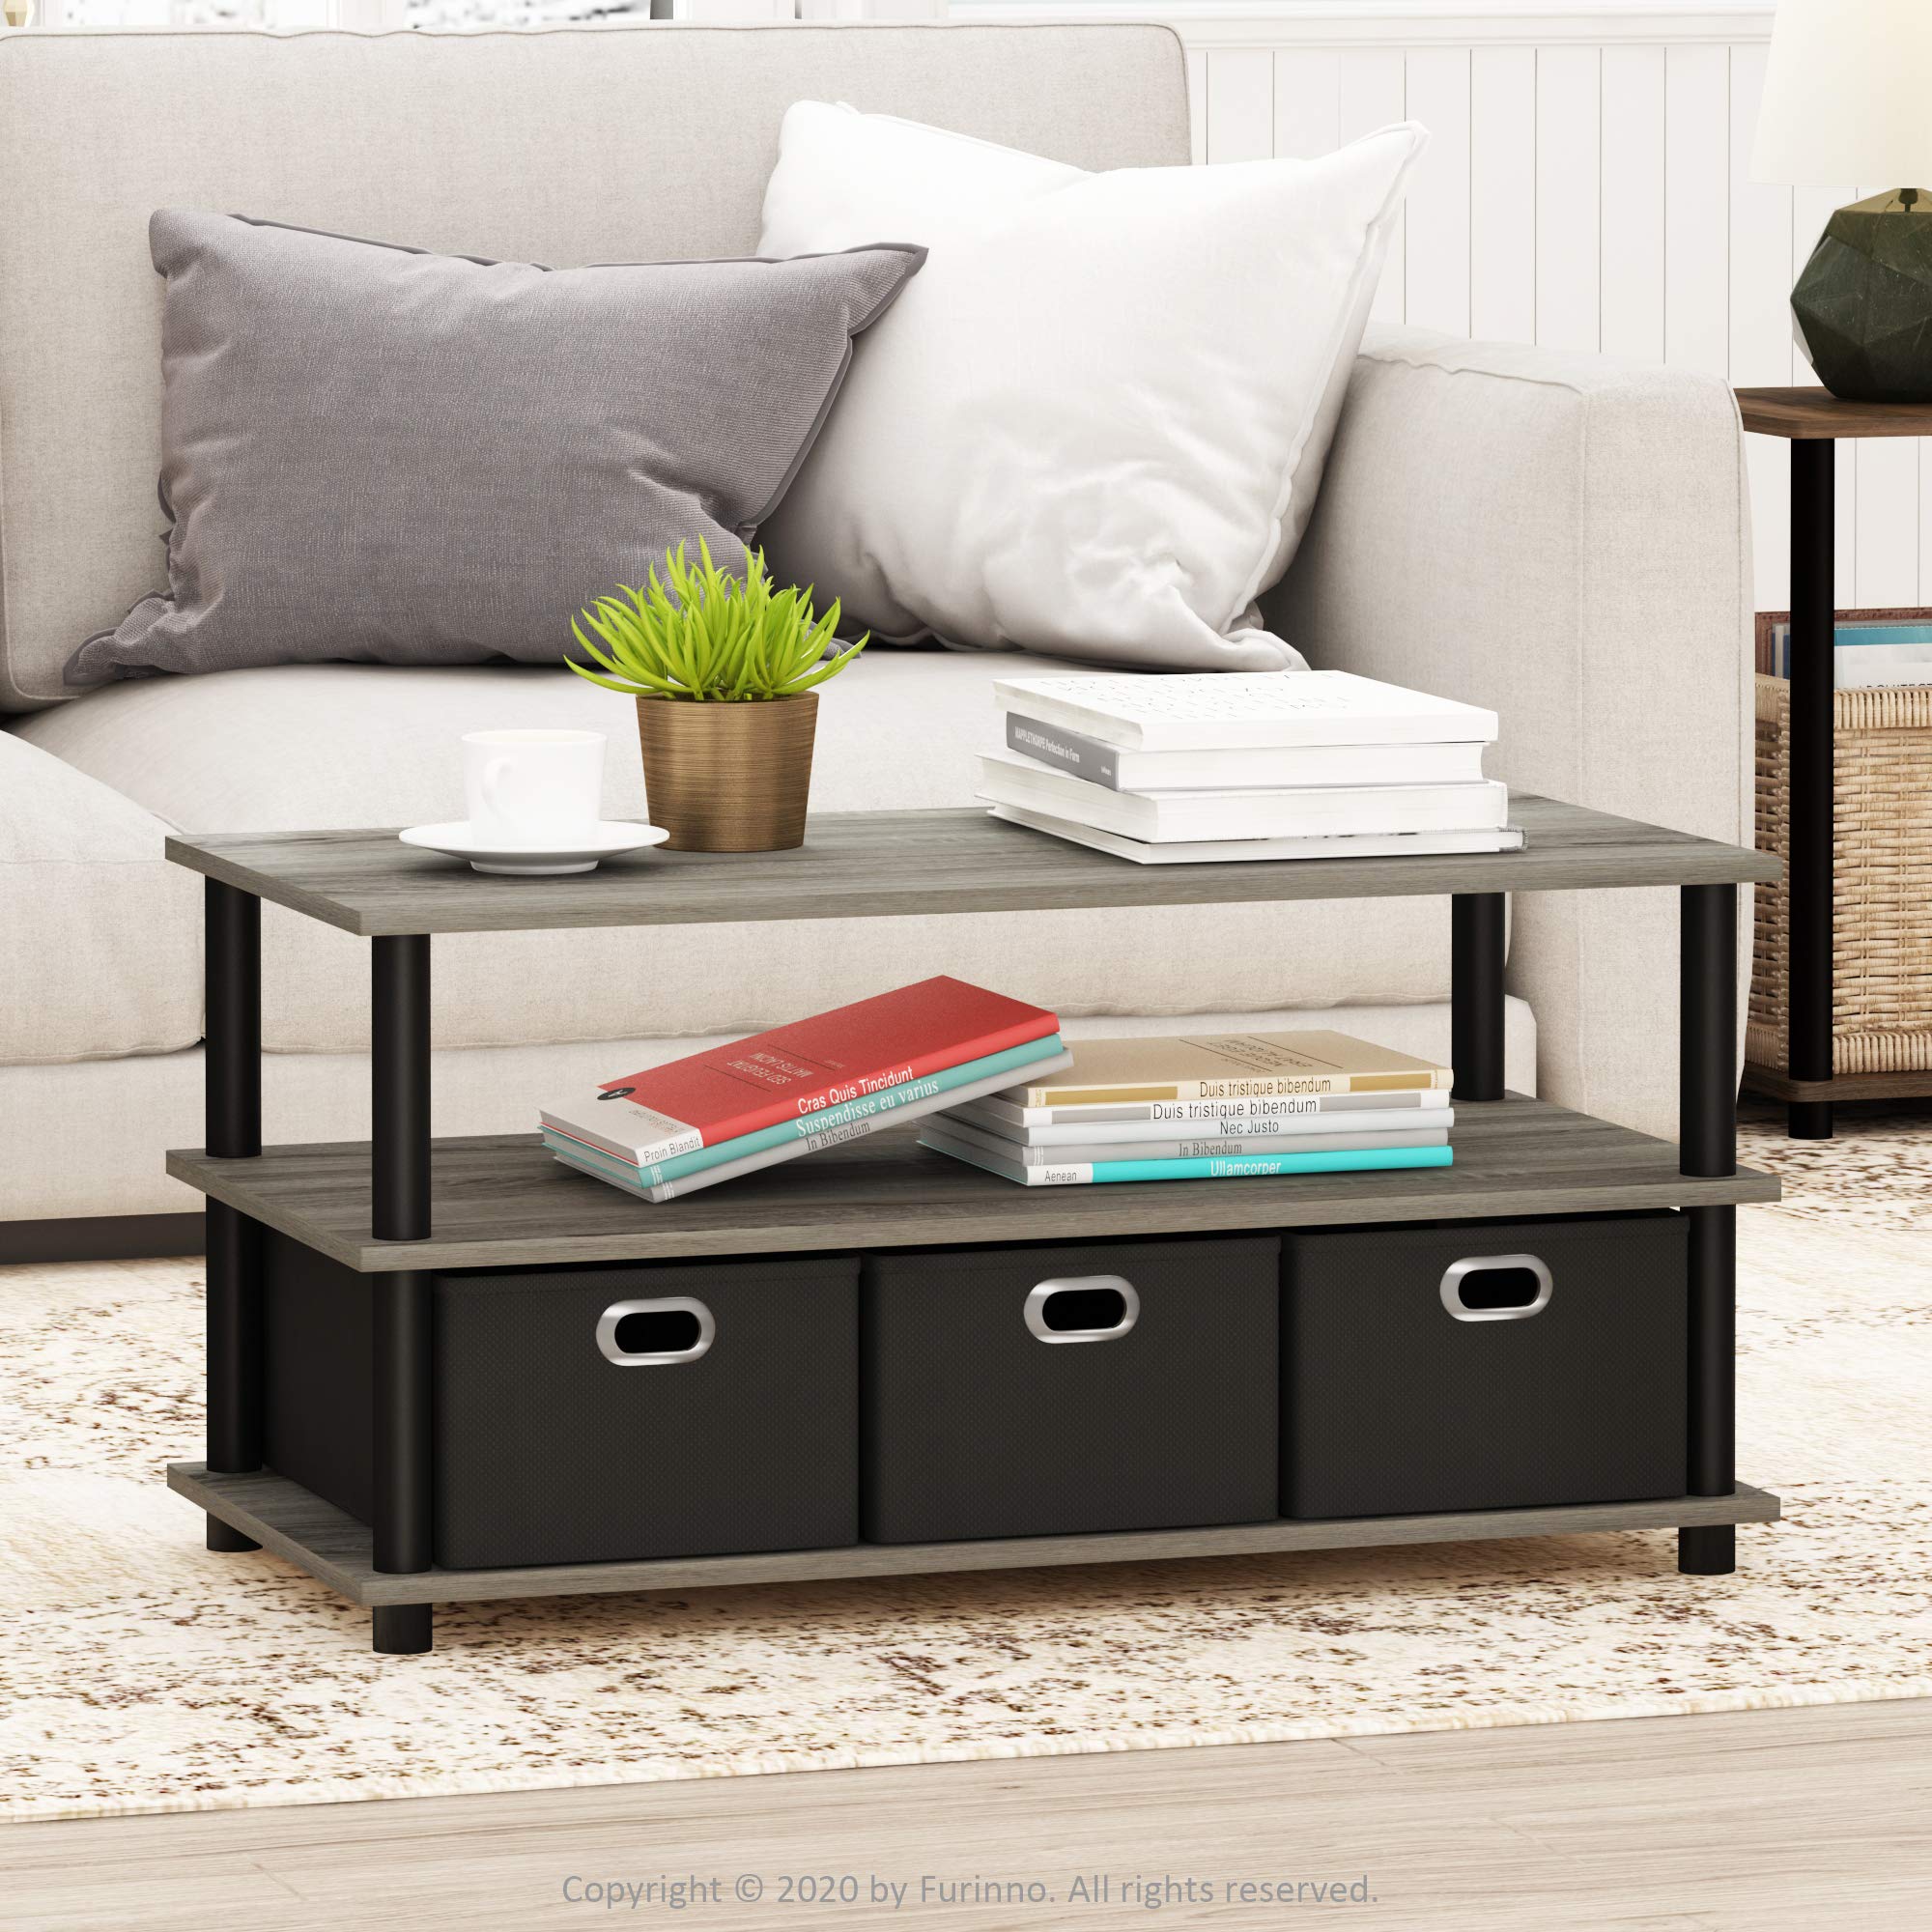 

Wooden Coffee Table With Storage Bins, 31.22d X 15.5w X 15.8h Inches, French Oak Grey Black, Non-woven Bins Included